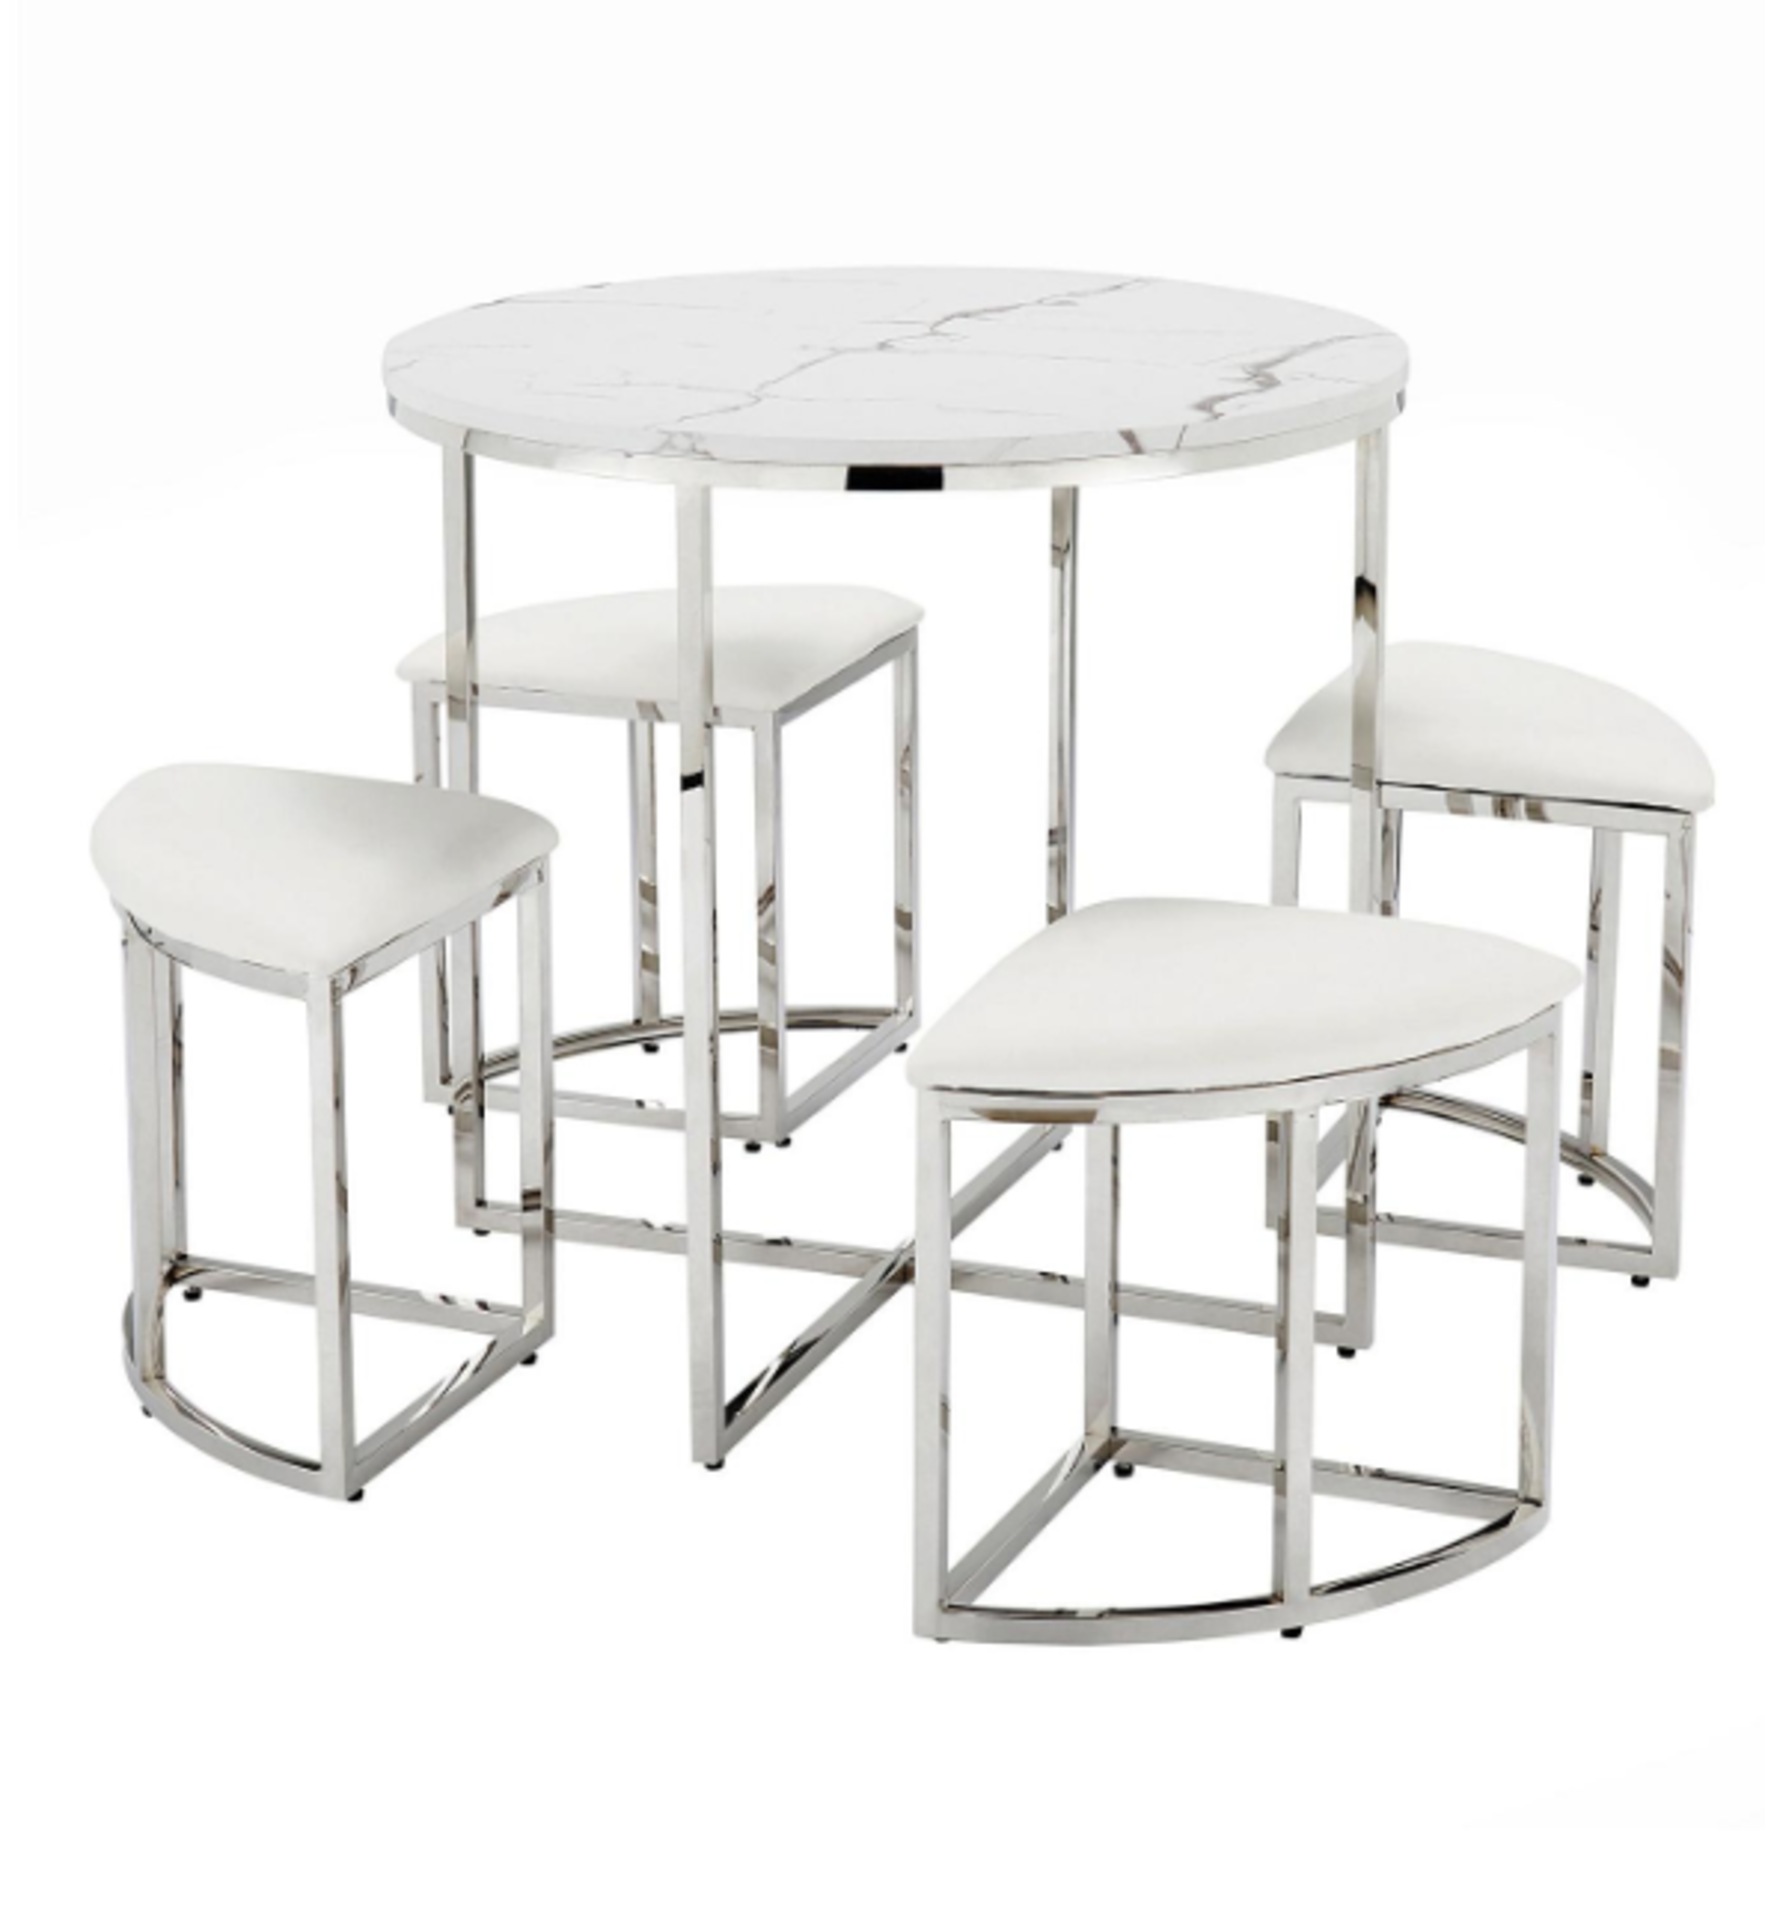 New & Boxed Milan Hideaway Space Saving Dining Sets. RRP £399 each. If you’re looking for a dining - Image 4 of 4